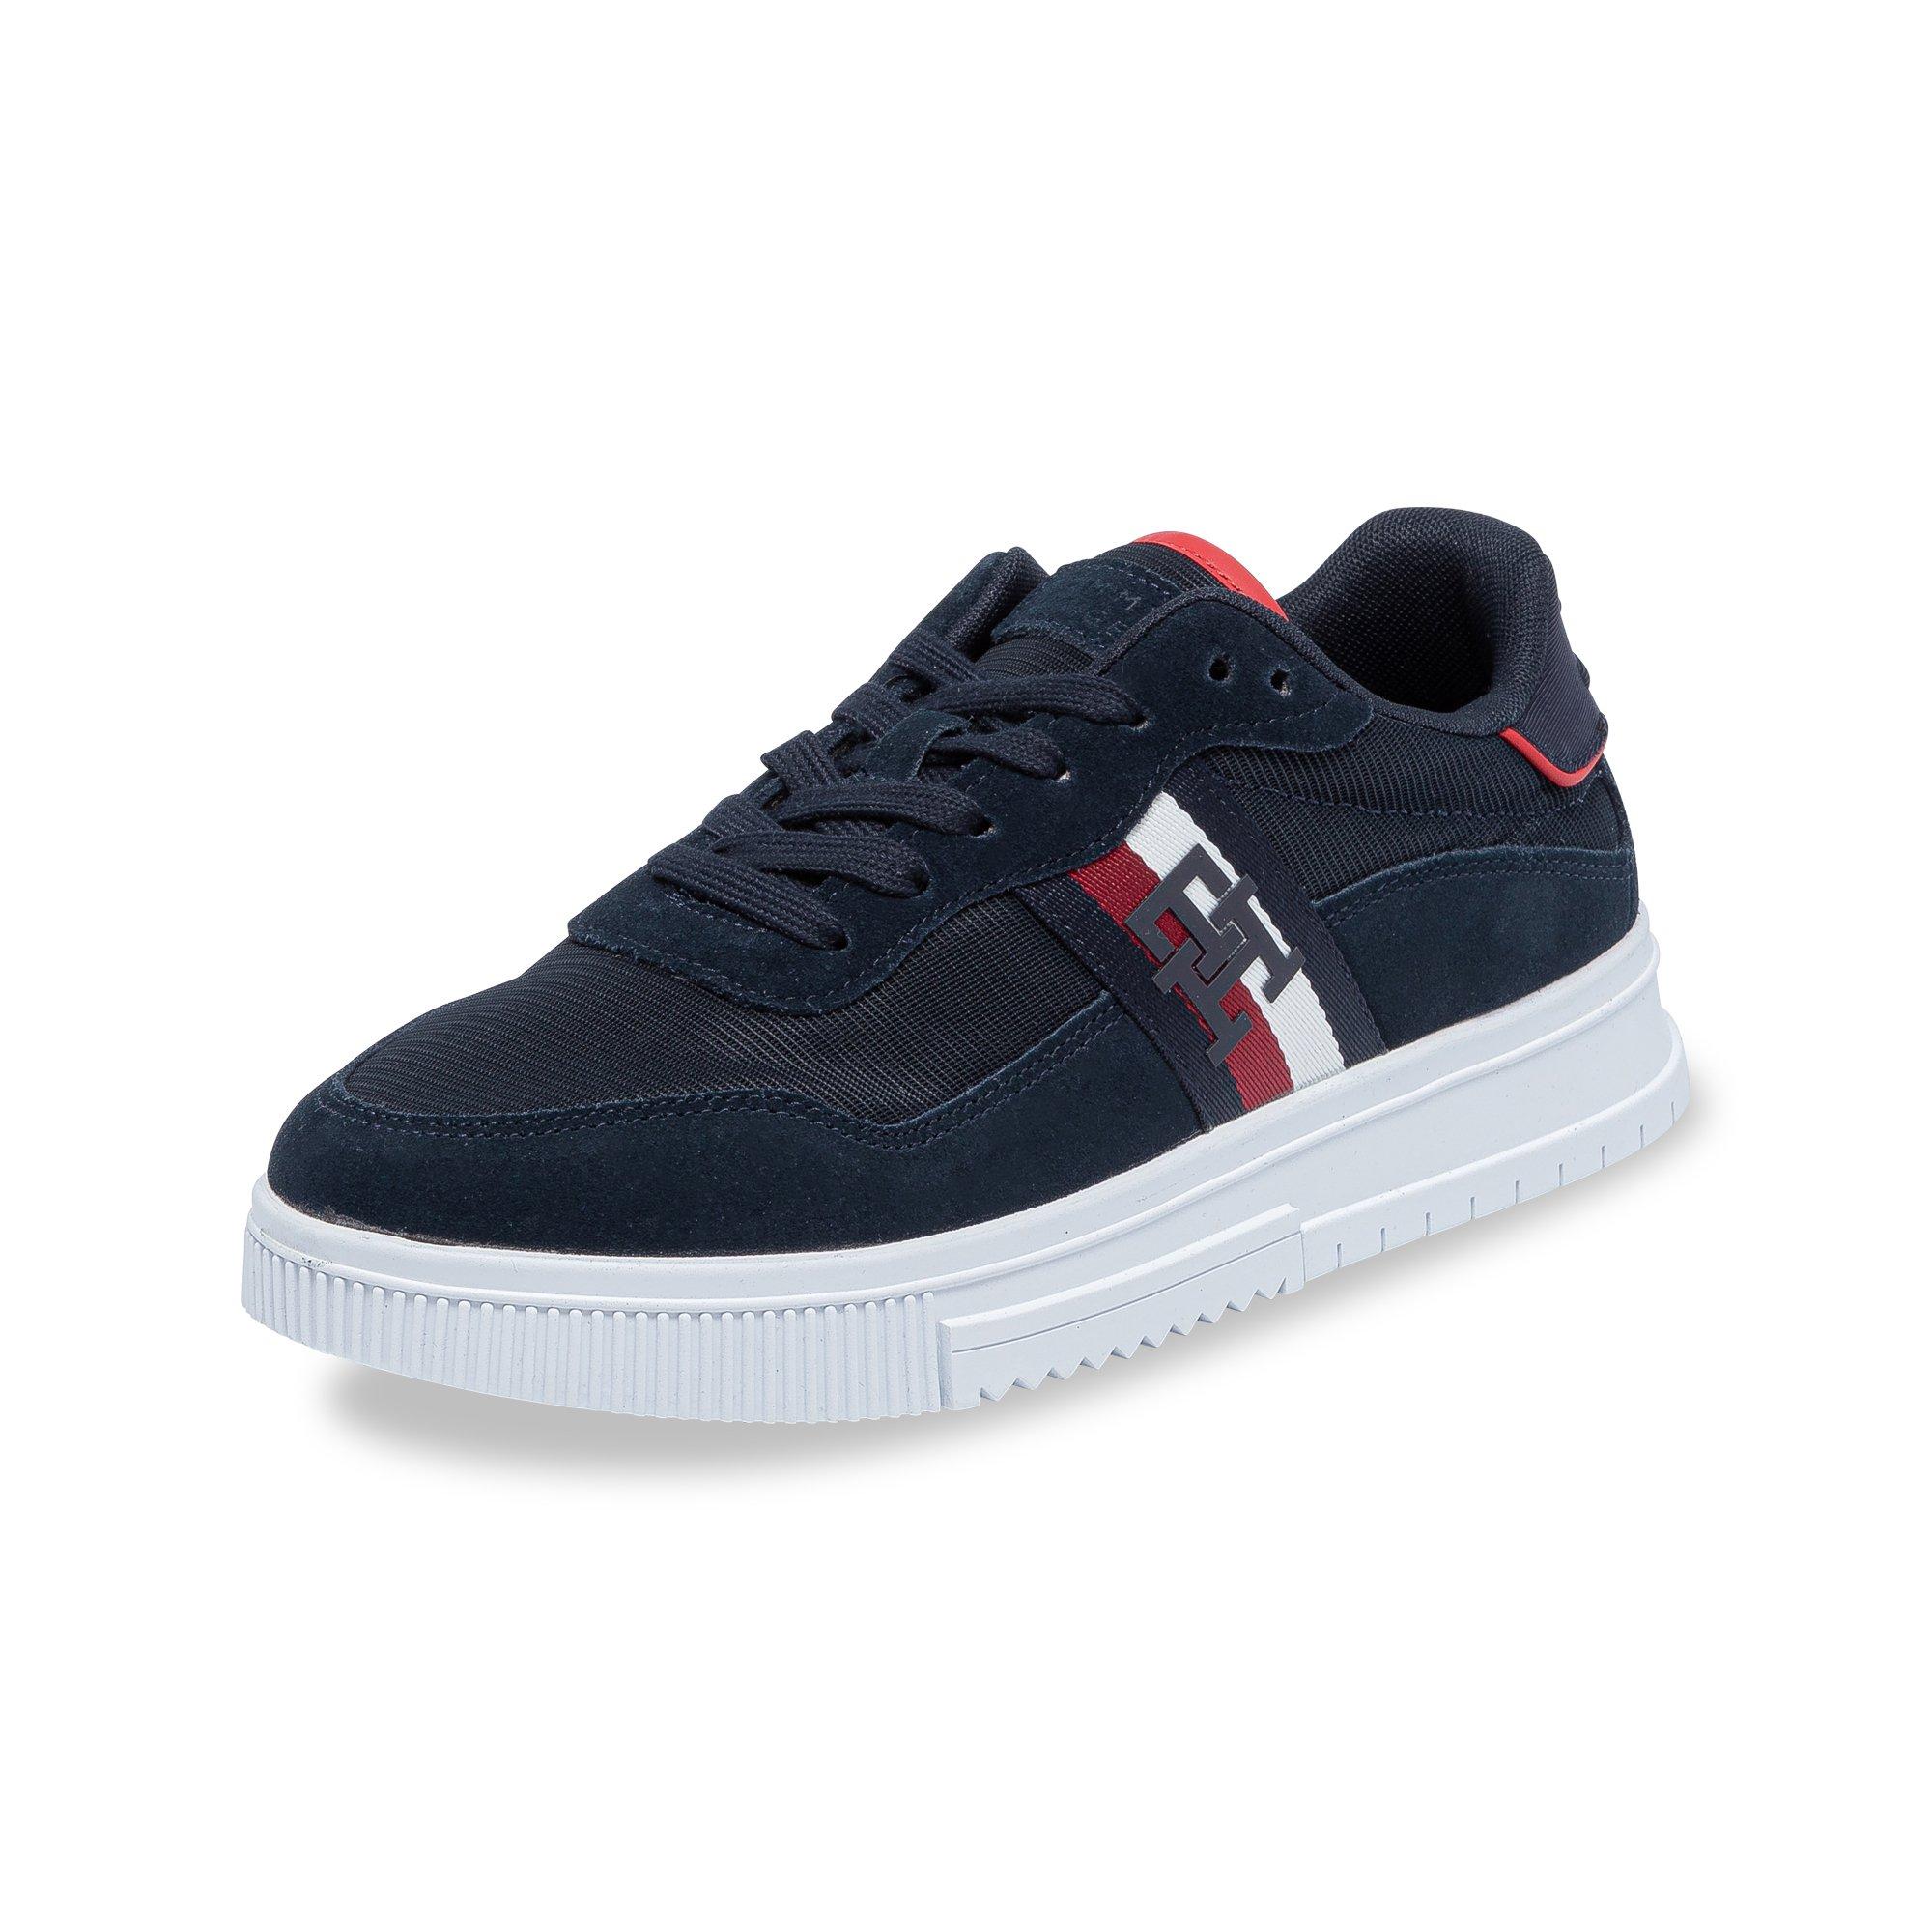 TOMMY HILFIGER SUPERCUP MIX Sneakers, bas 